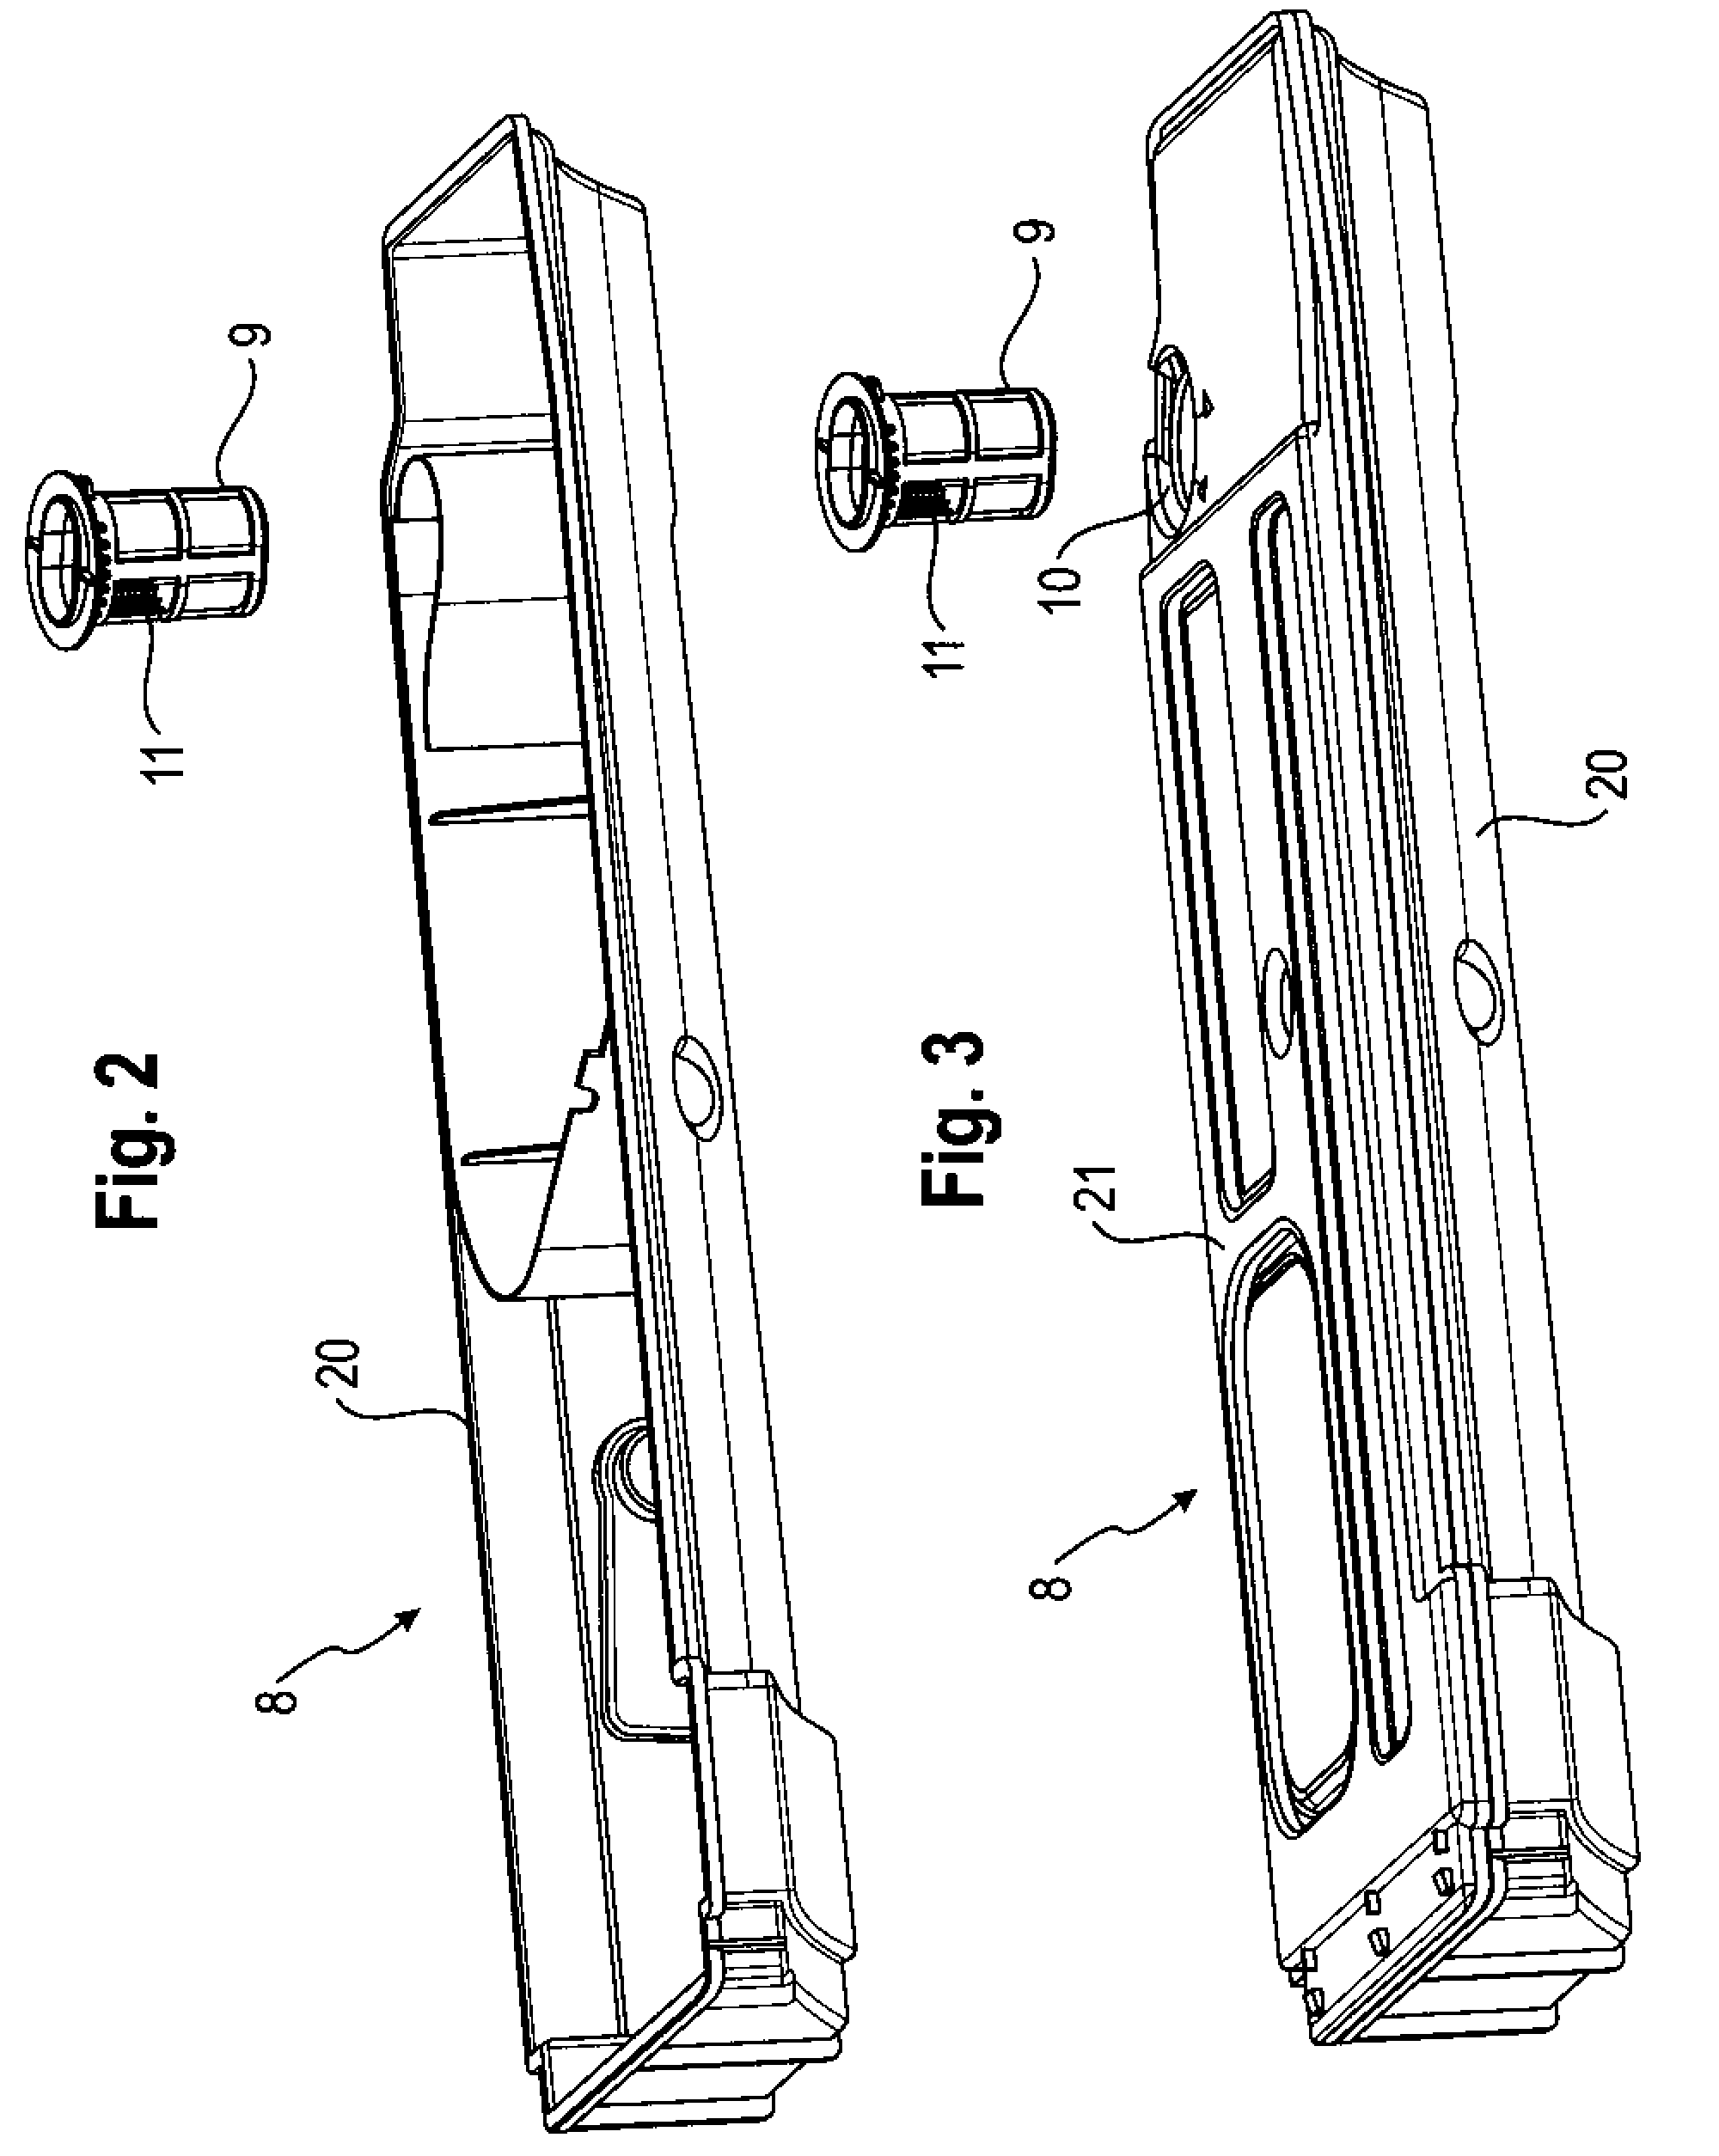 Dryer comprising a heat sink and a condensate container